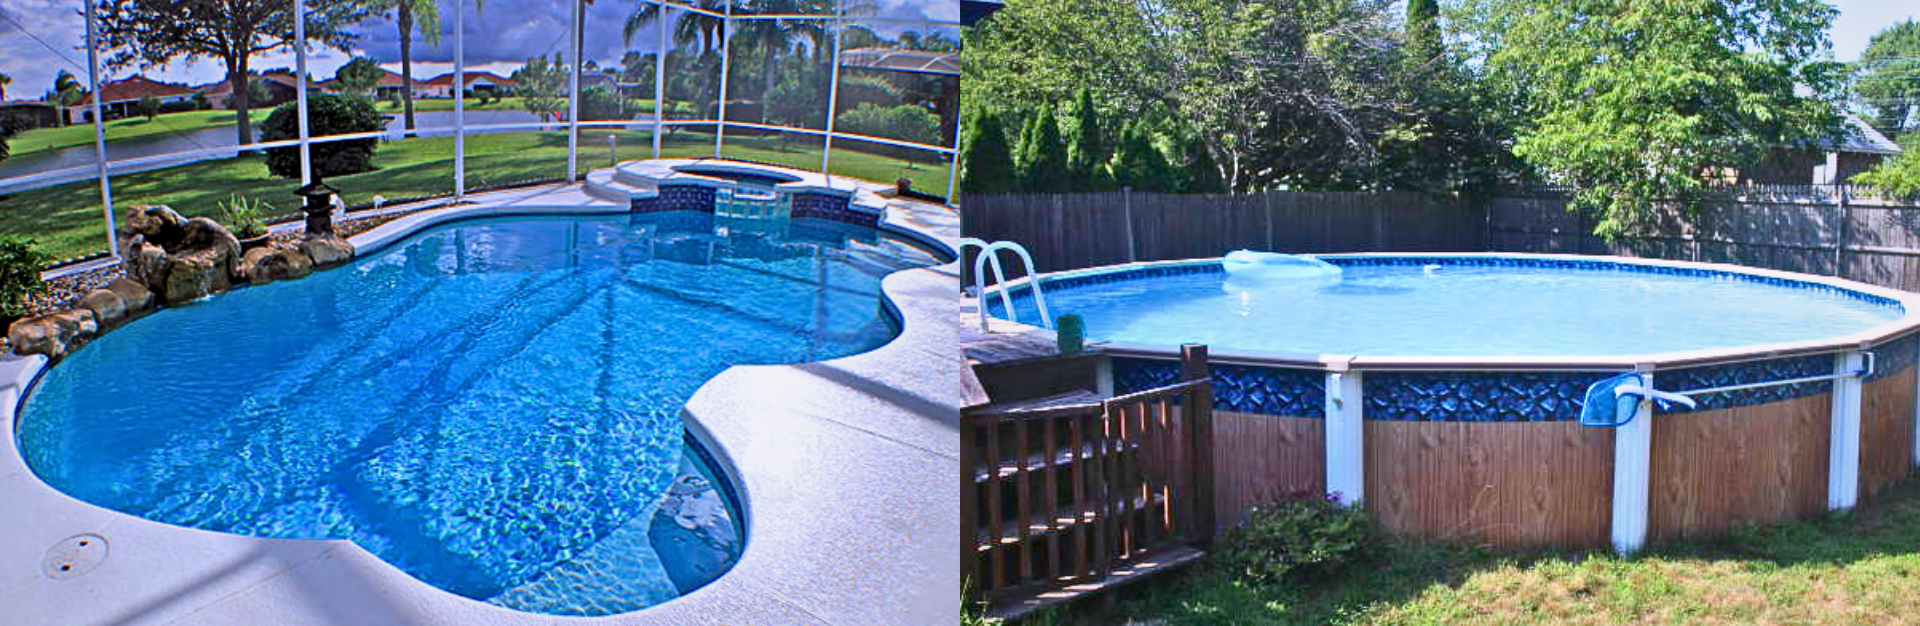 Swimming Pools:  In-Ground vs Above-Ground